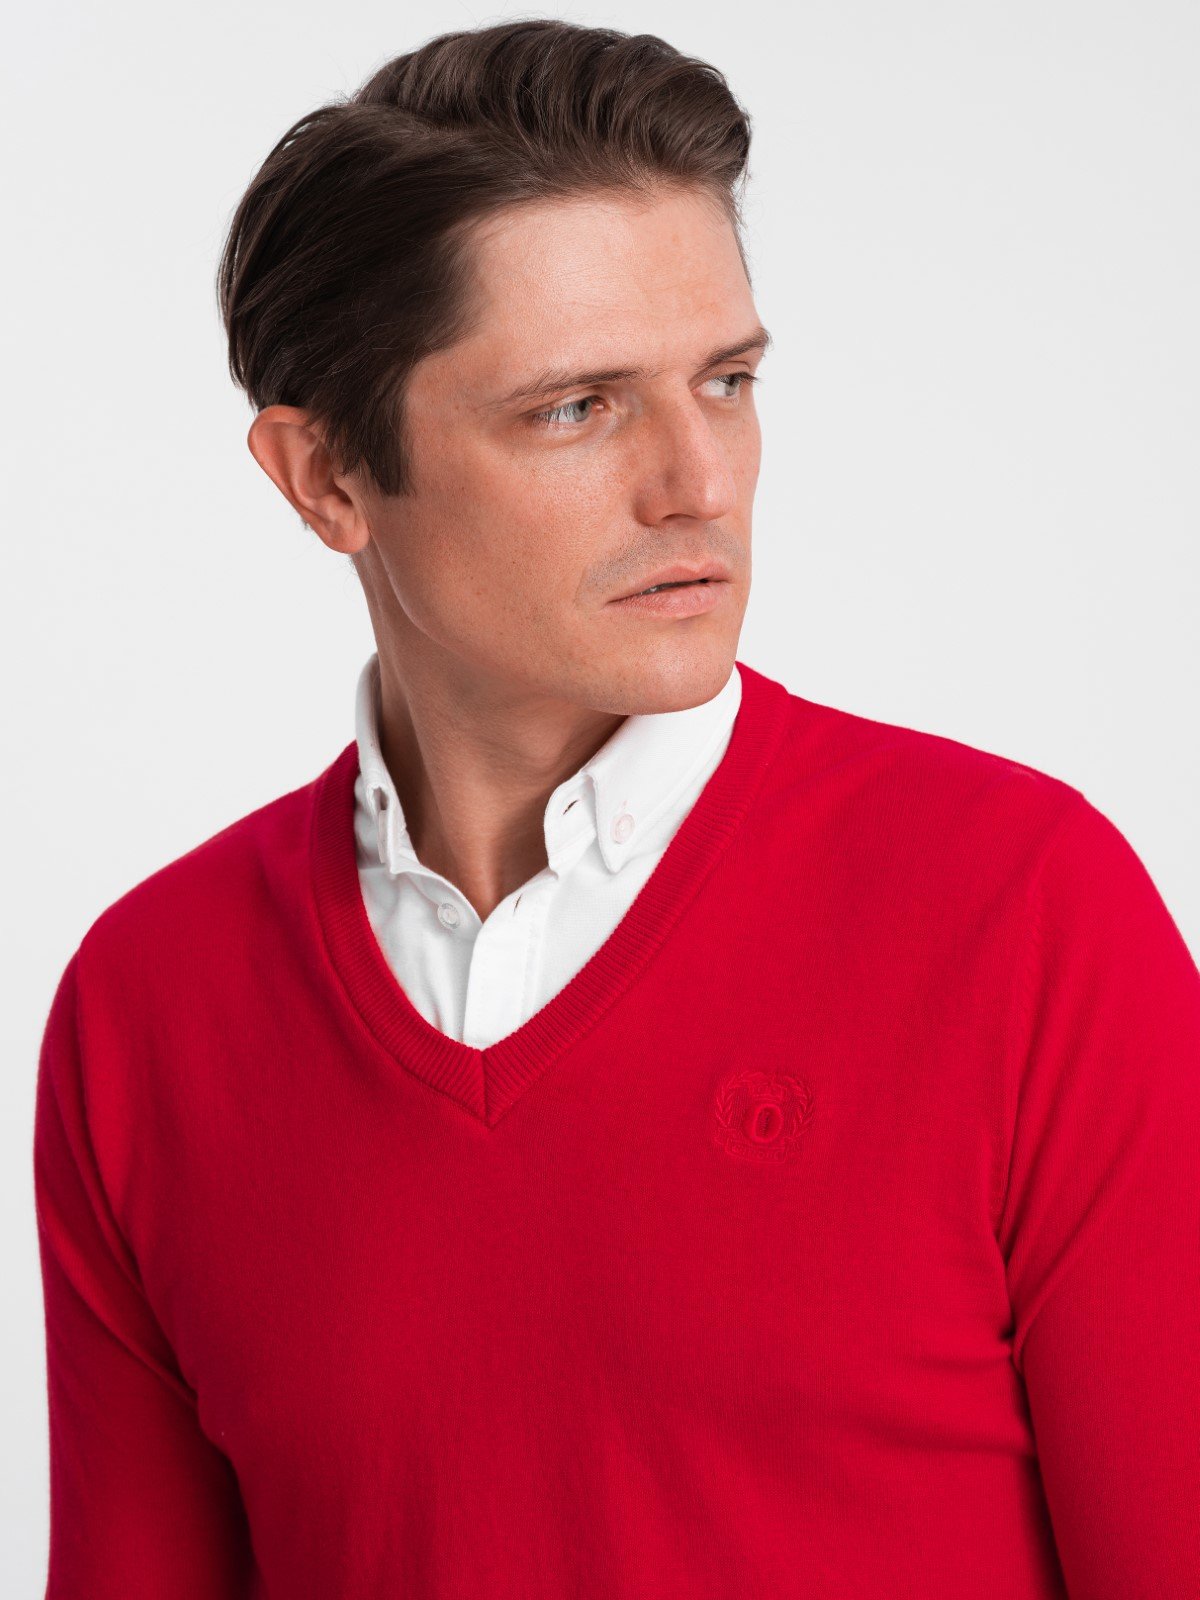 Ombre Men's sweater with a "v-neck" neckline with a shirt collar - red